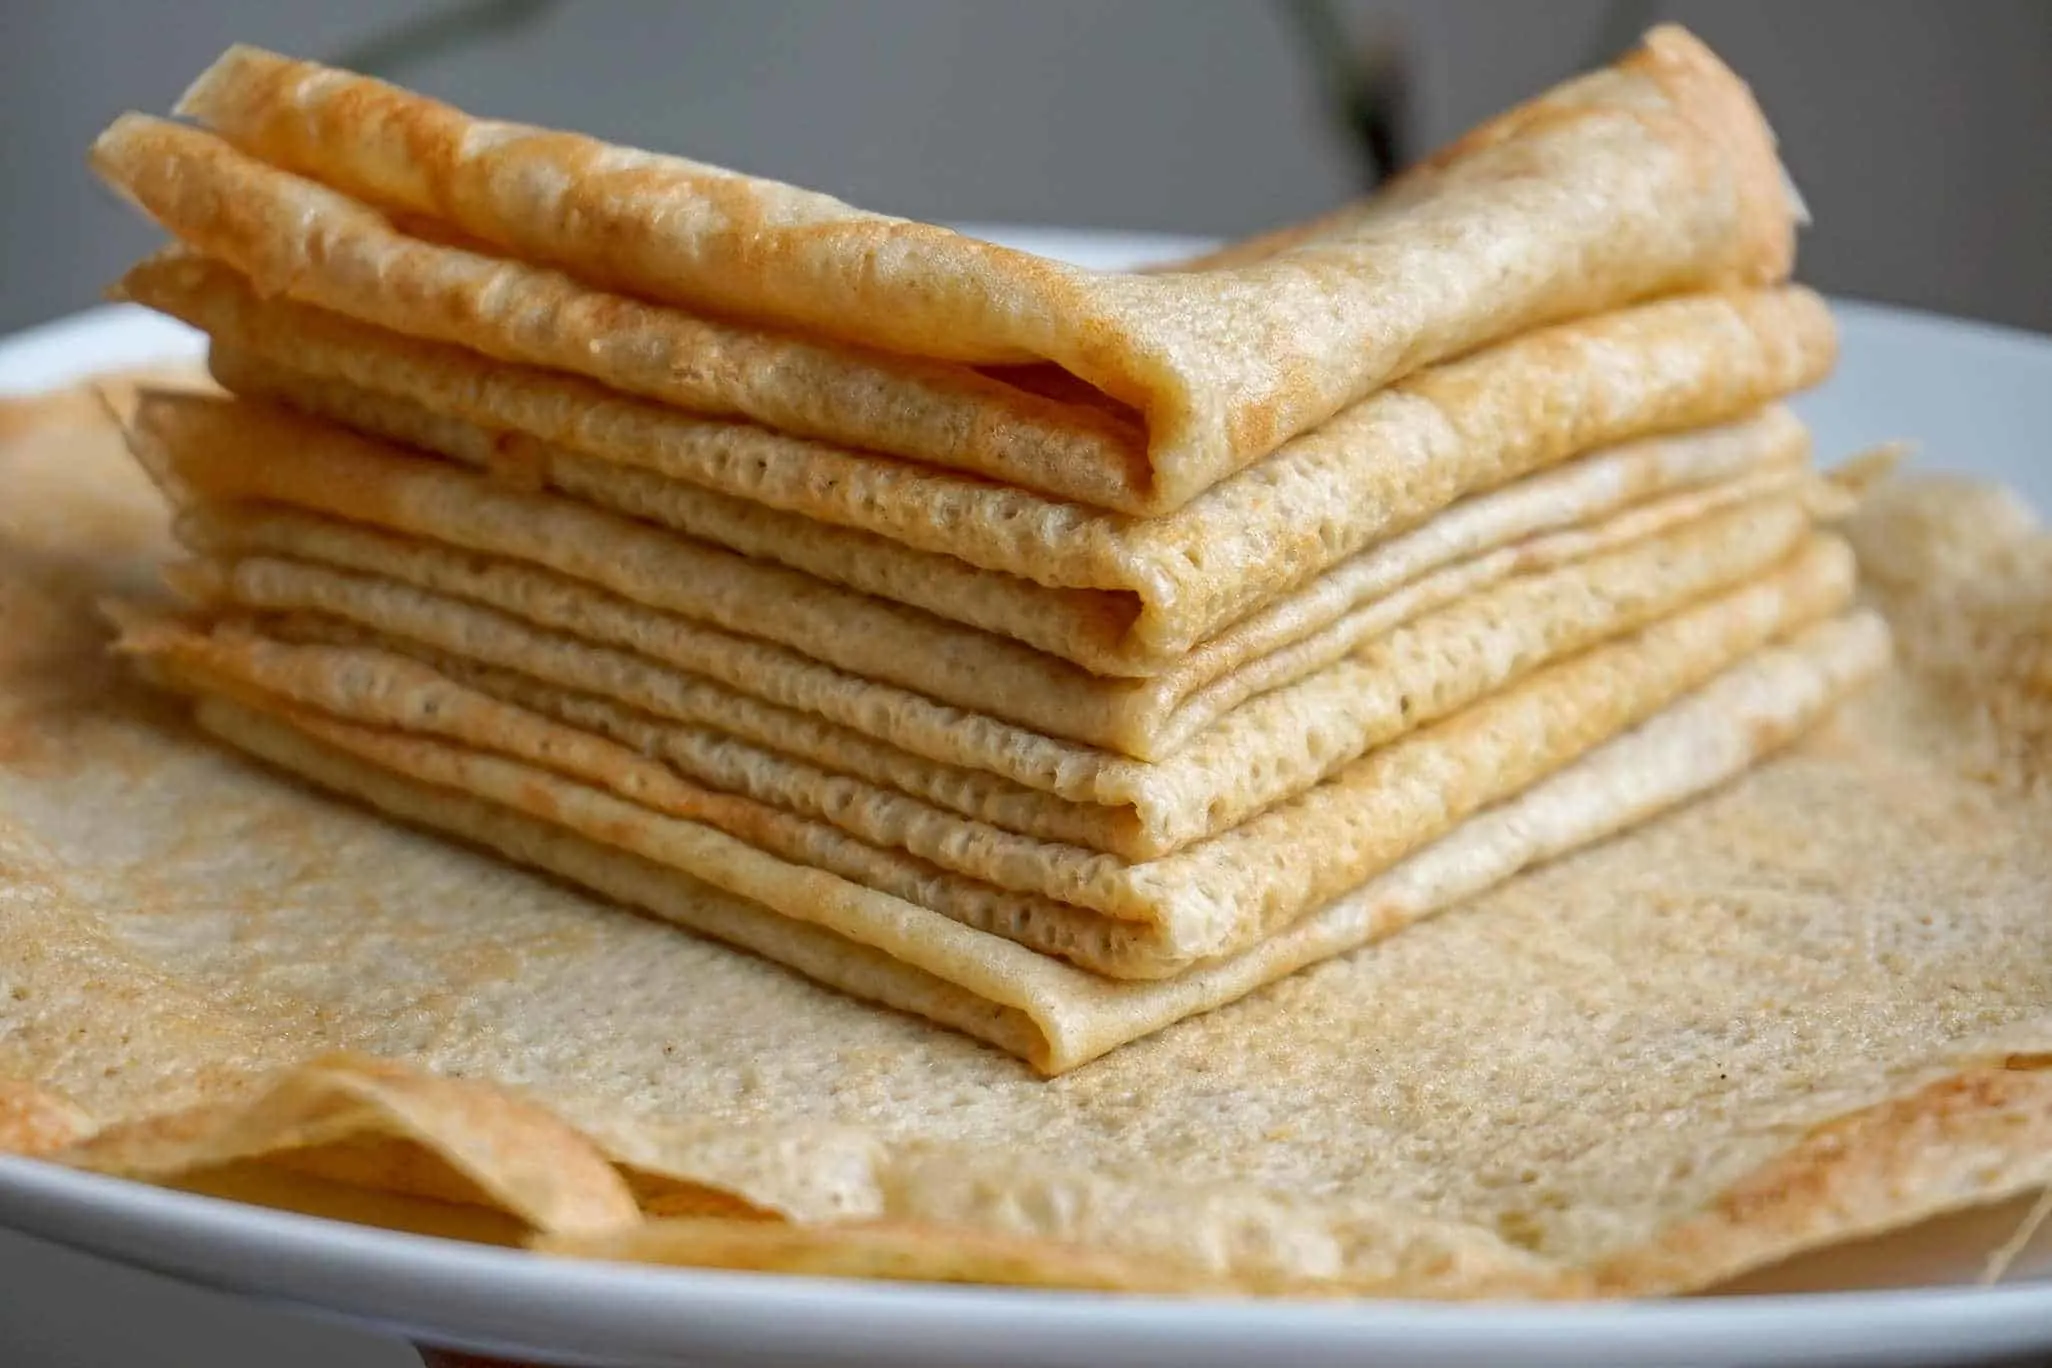 Dairy free gluten free crepes folded and stacked on a plate.